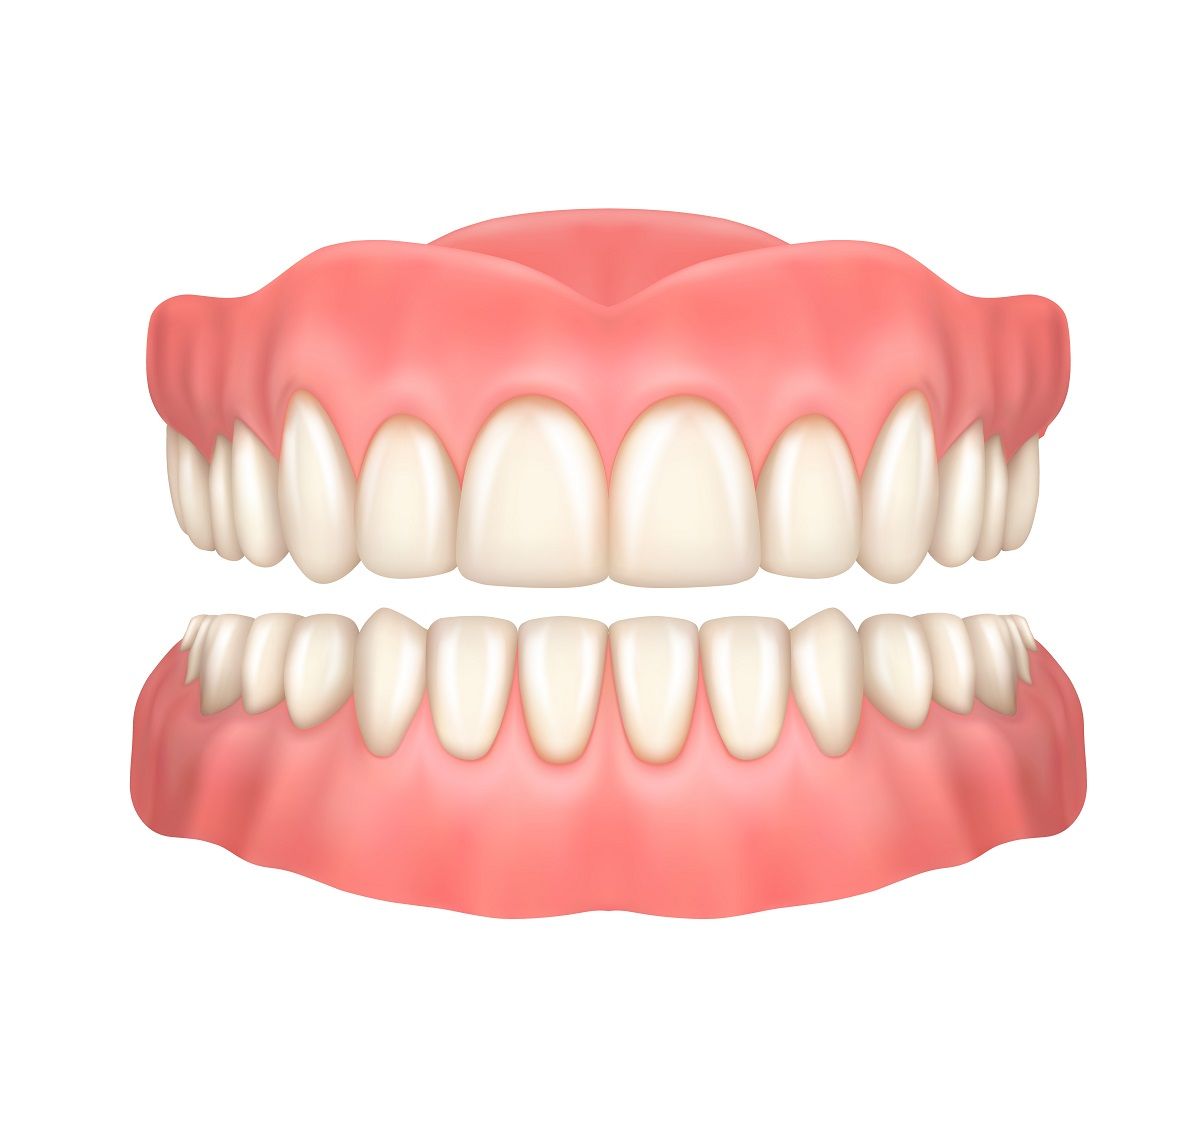 The Denture Process and Caring Tips